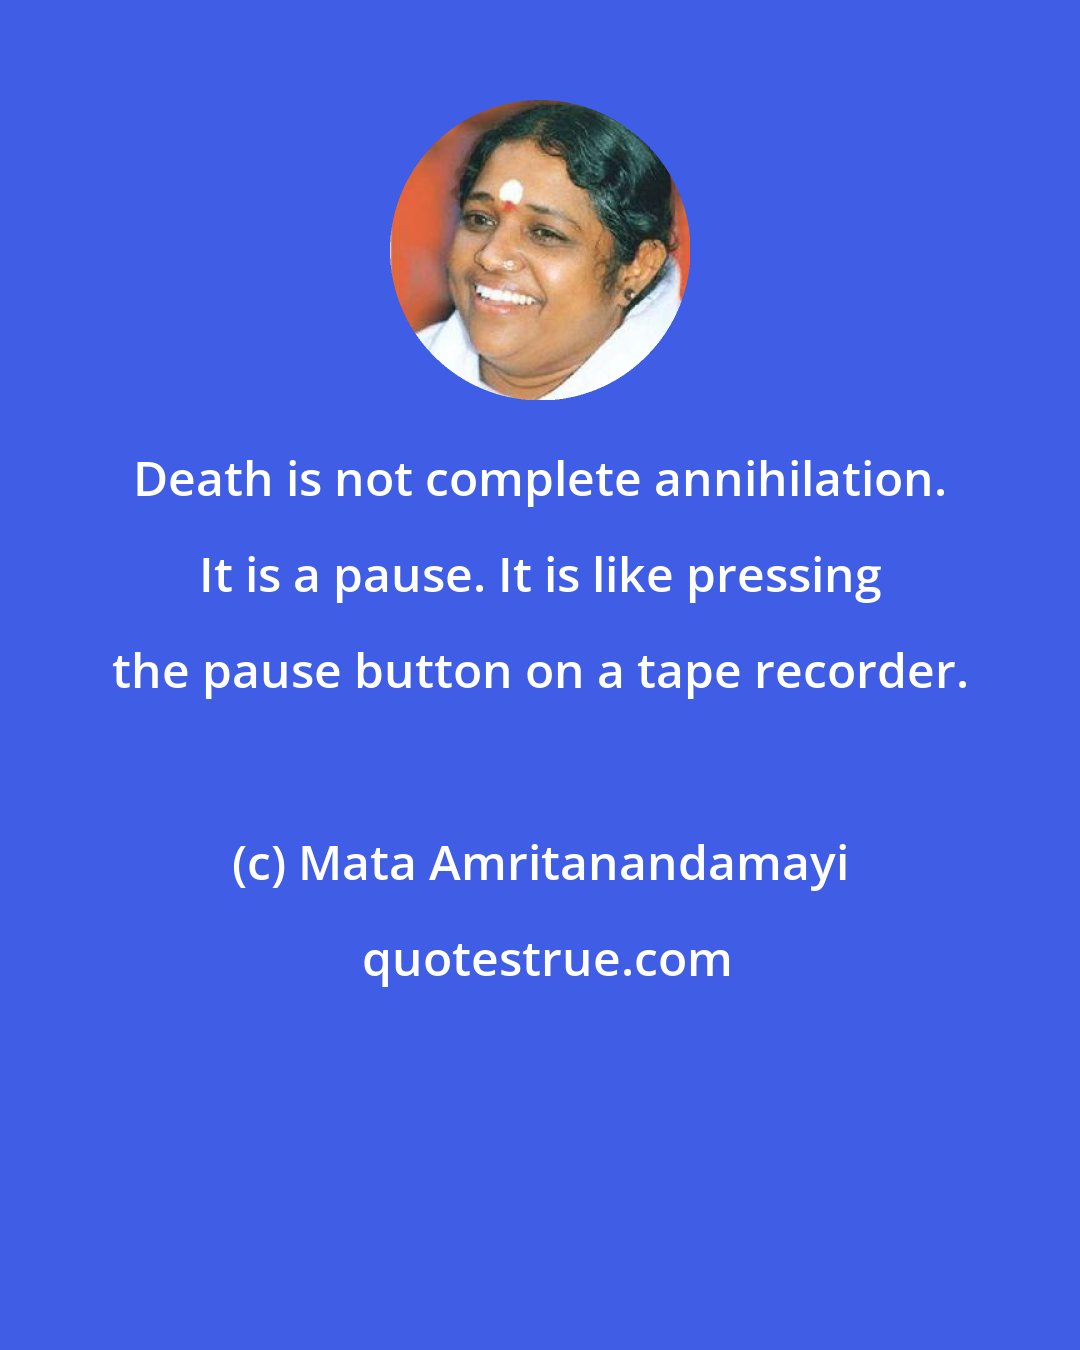 Mata Amritanandamayi: Death is not complete annihilation. It is a pause. It is like pressing the pause button on a tape recorder.